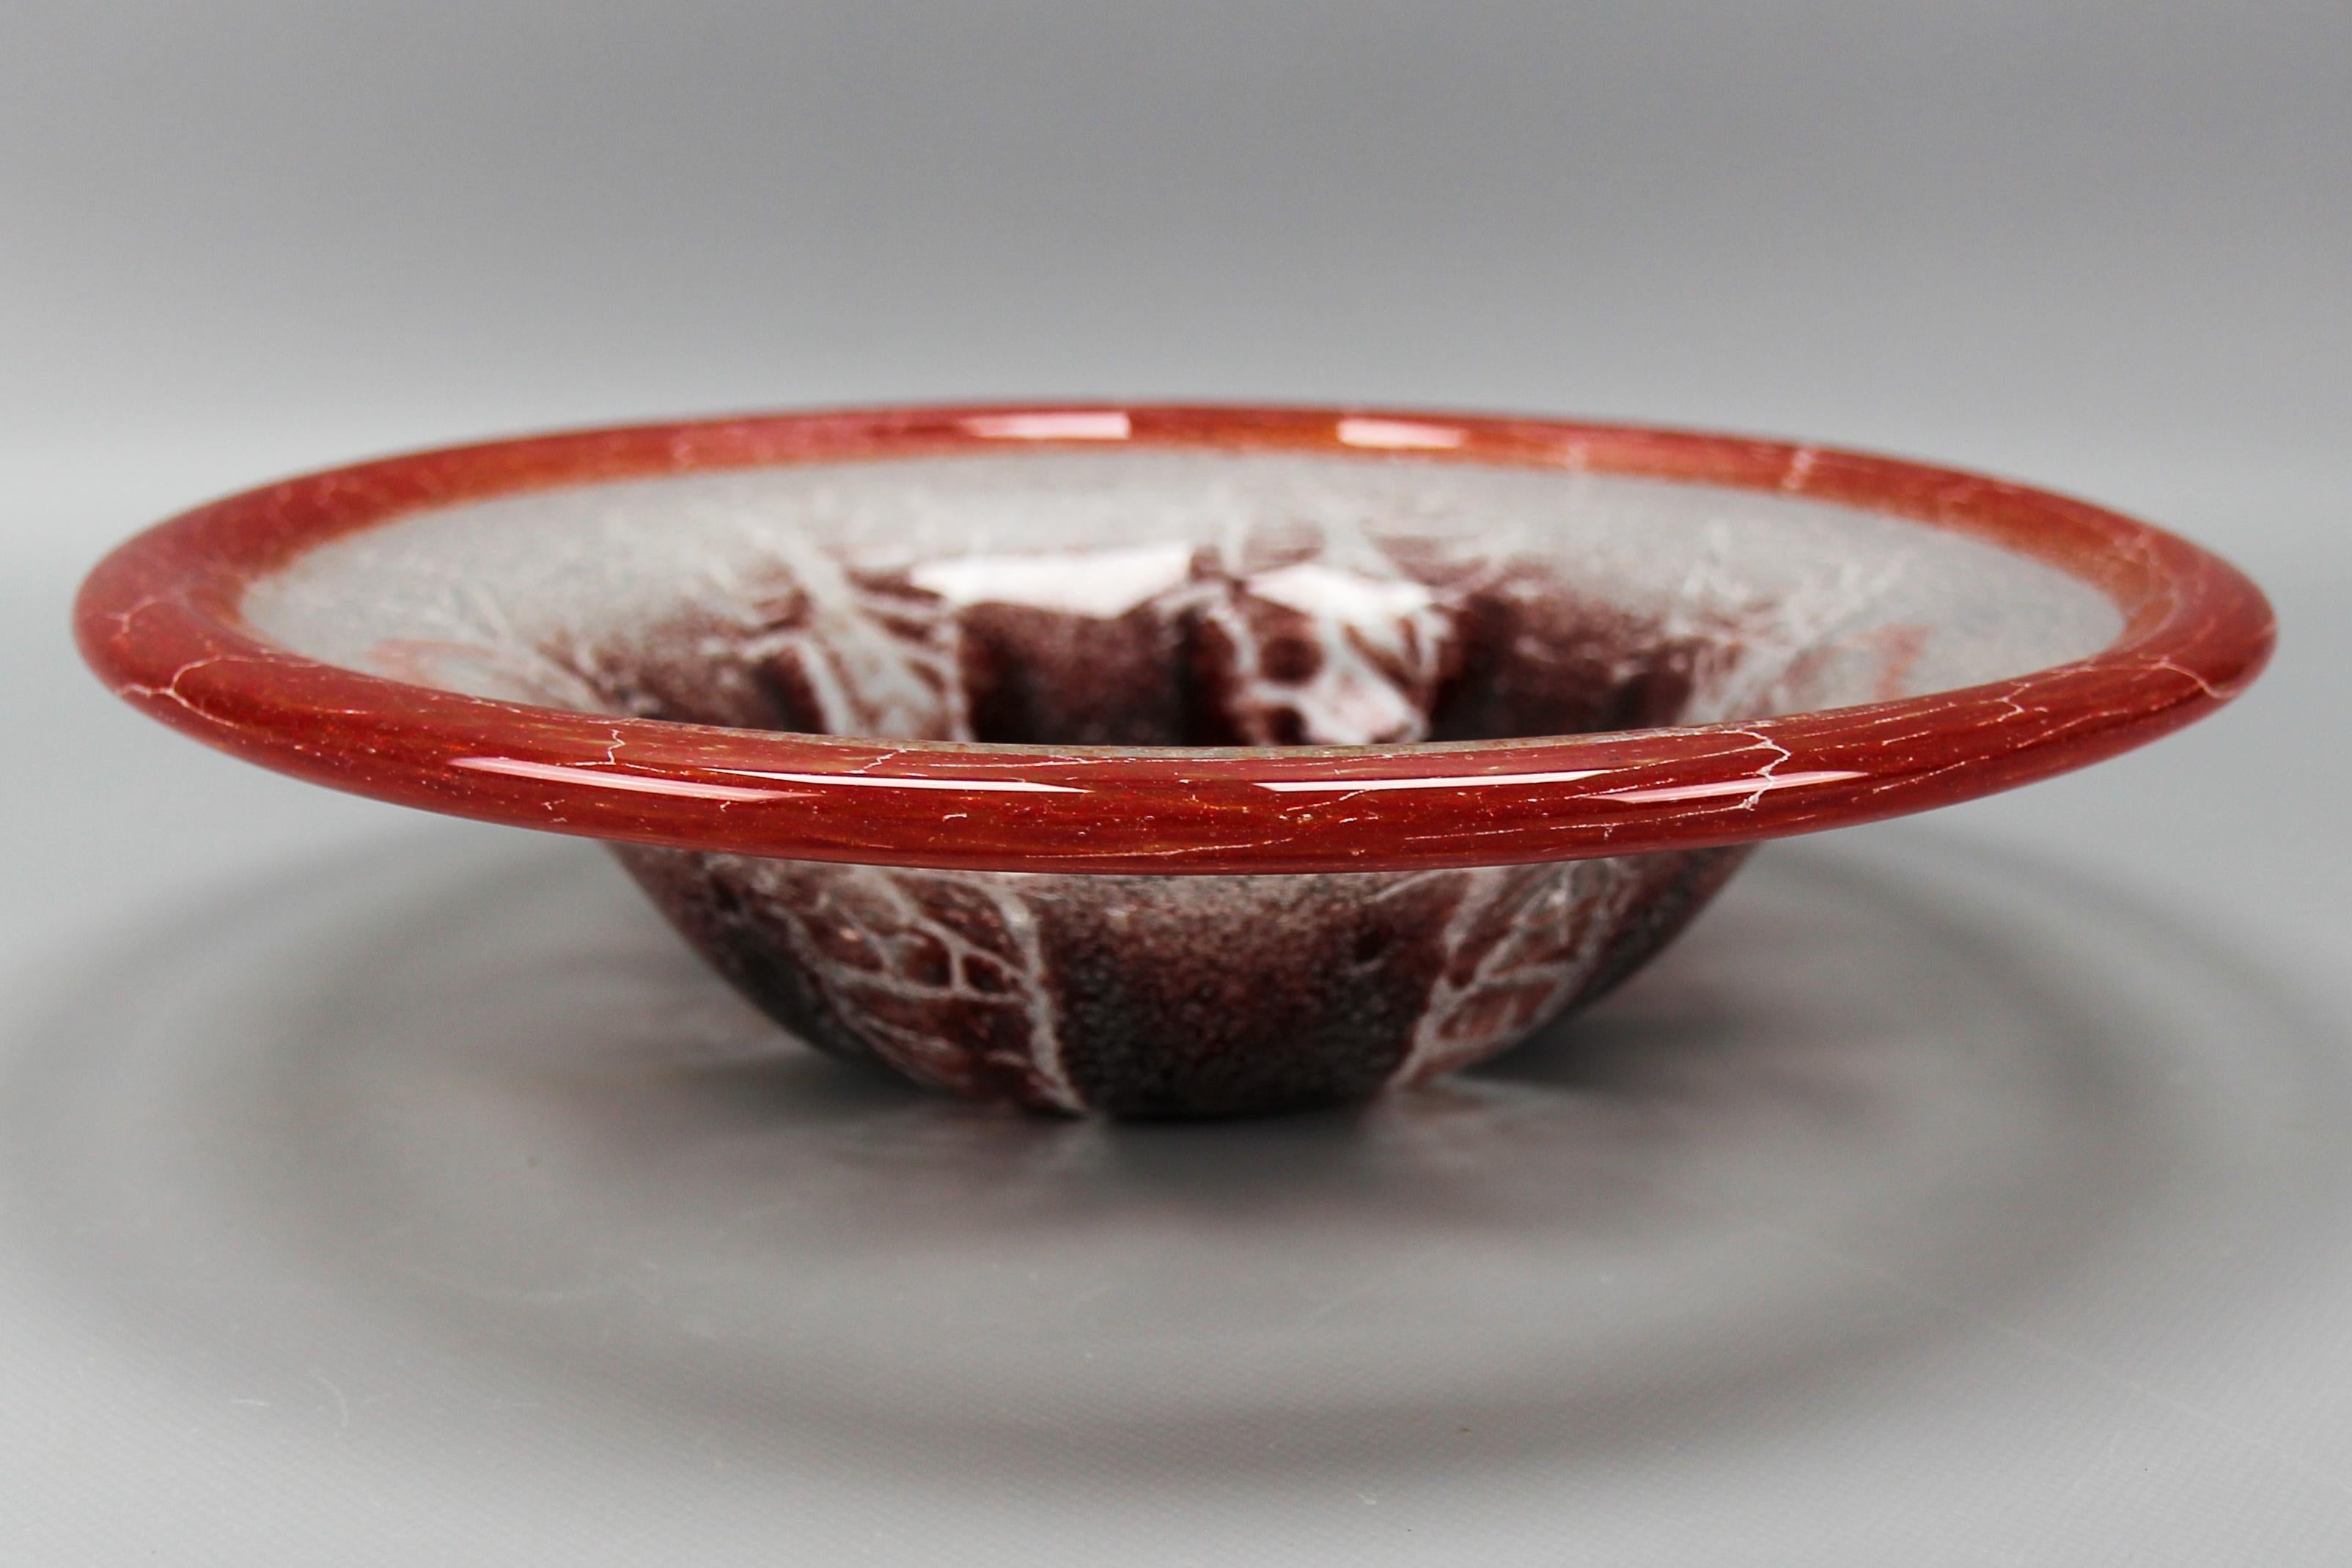 German Ikora Art Glass Bowl in Red, White and Burgundy by WMF, ca. 1930s For Sale 10